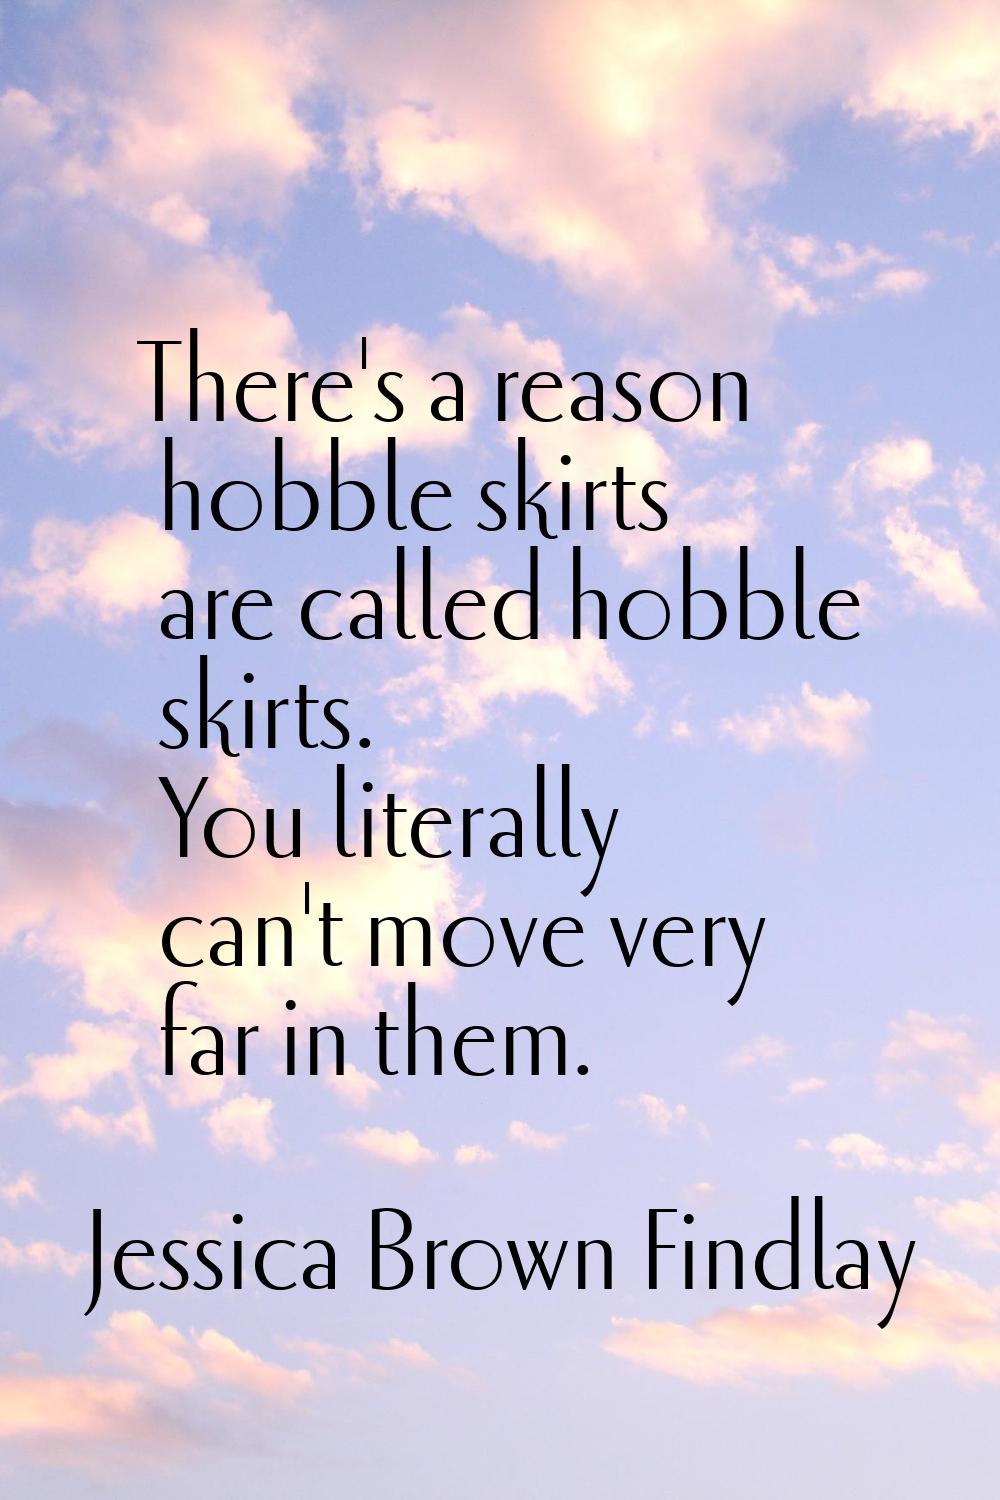 There's a reason hobble skirts are called hobble skirts. You literally can't move very far in them.